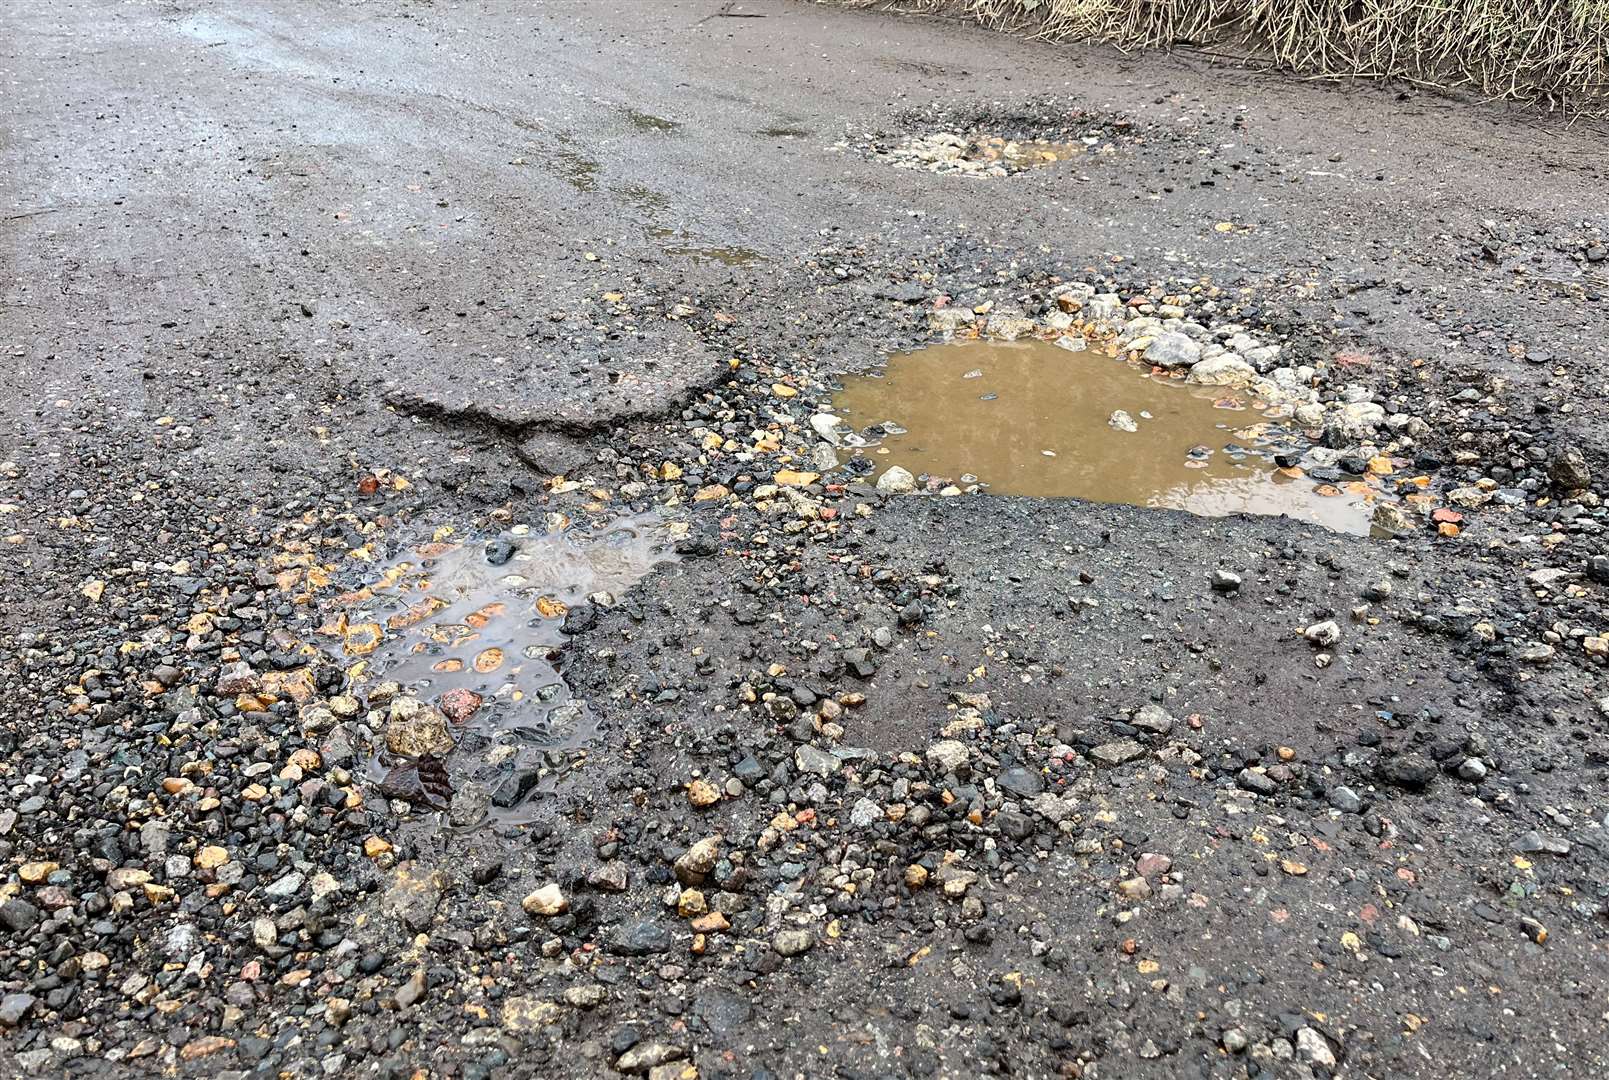 Residents fear the potholes in Bockhanger Lane "are getting worse by the day"